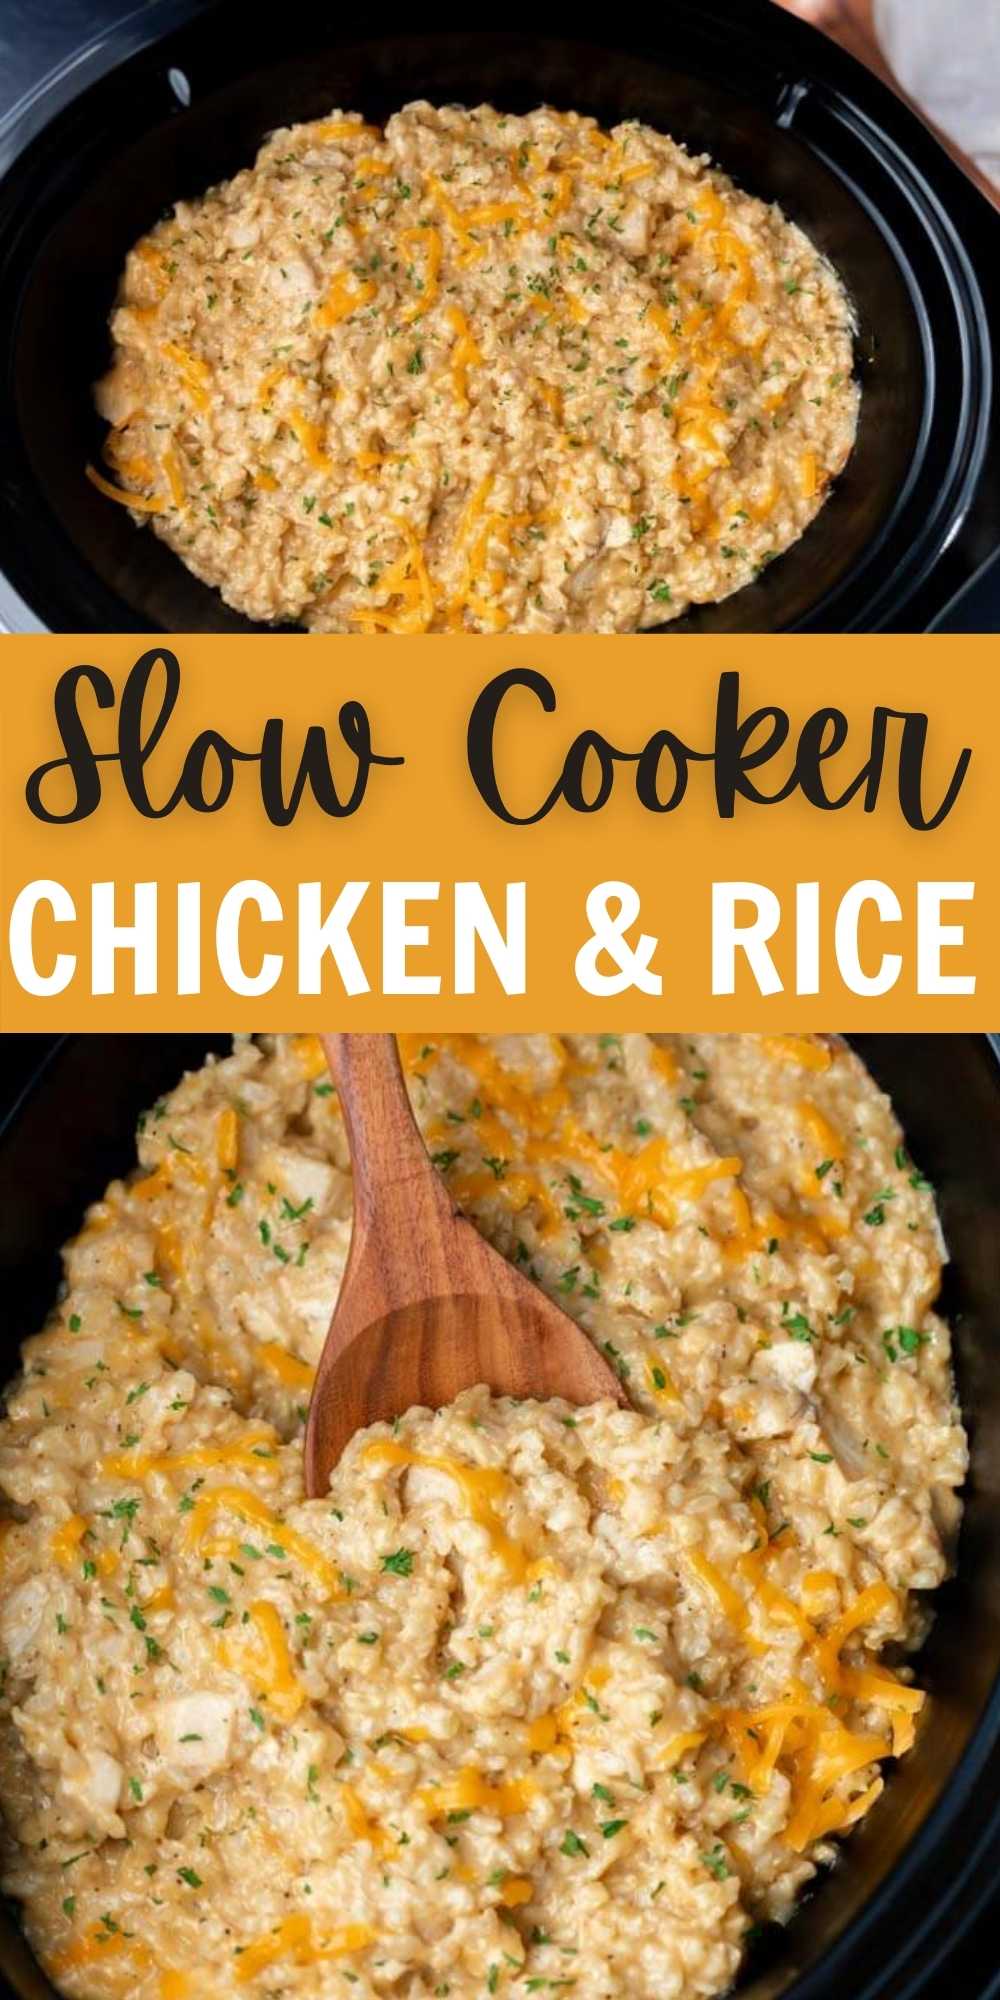 Crock Pot Chicken and Rice Recipe (& VIDEO!) - Easy Chicken and Rice